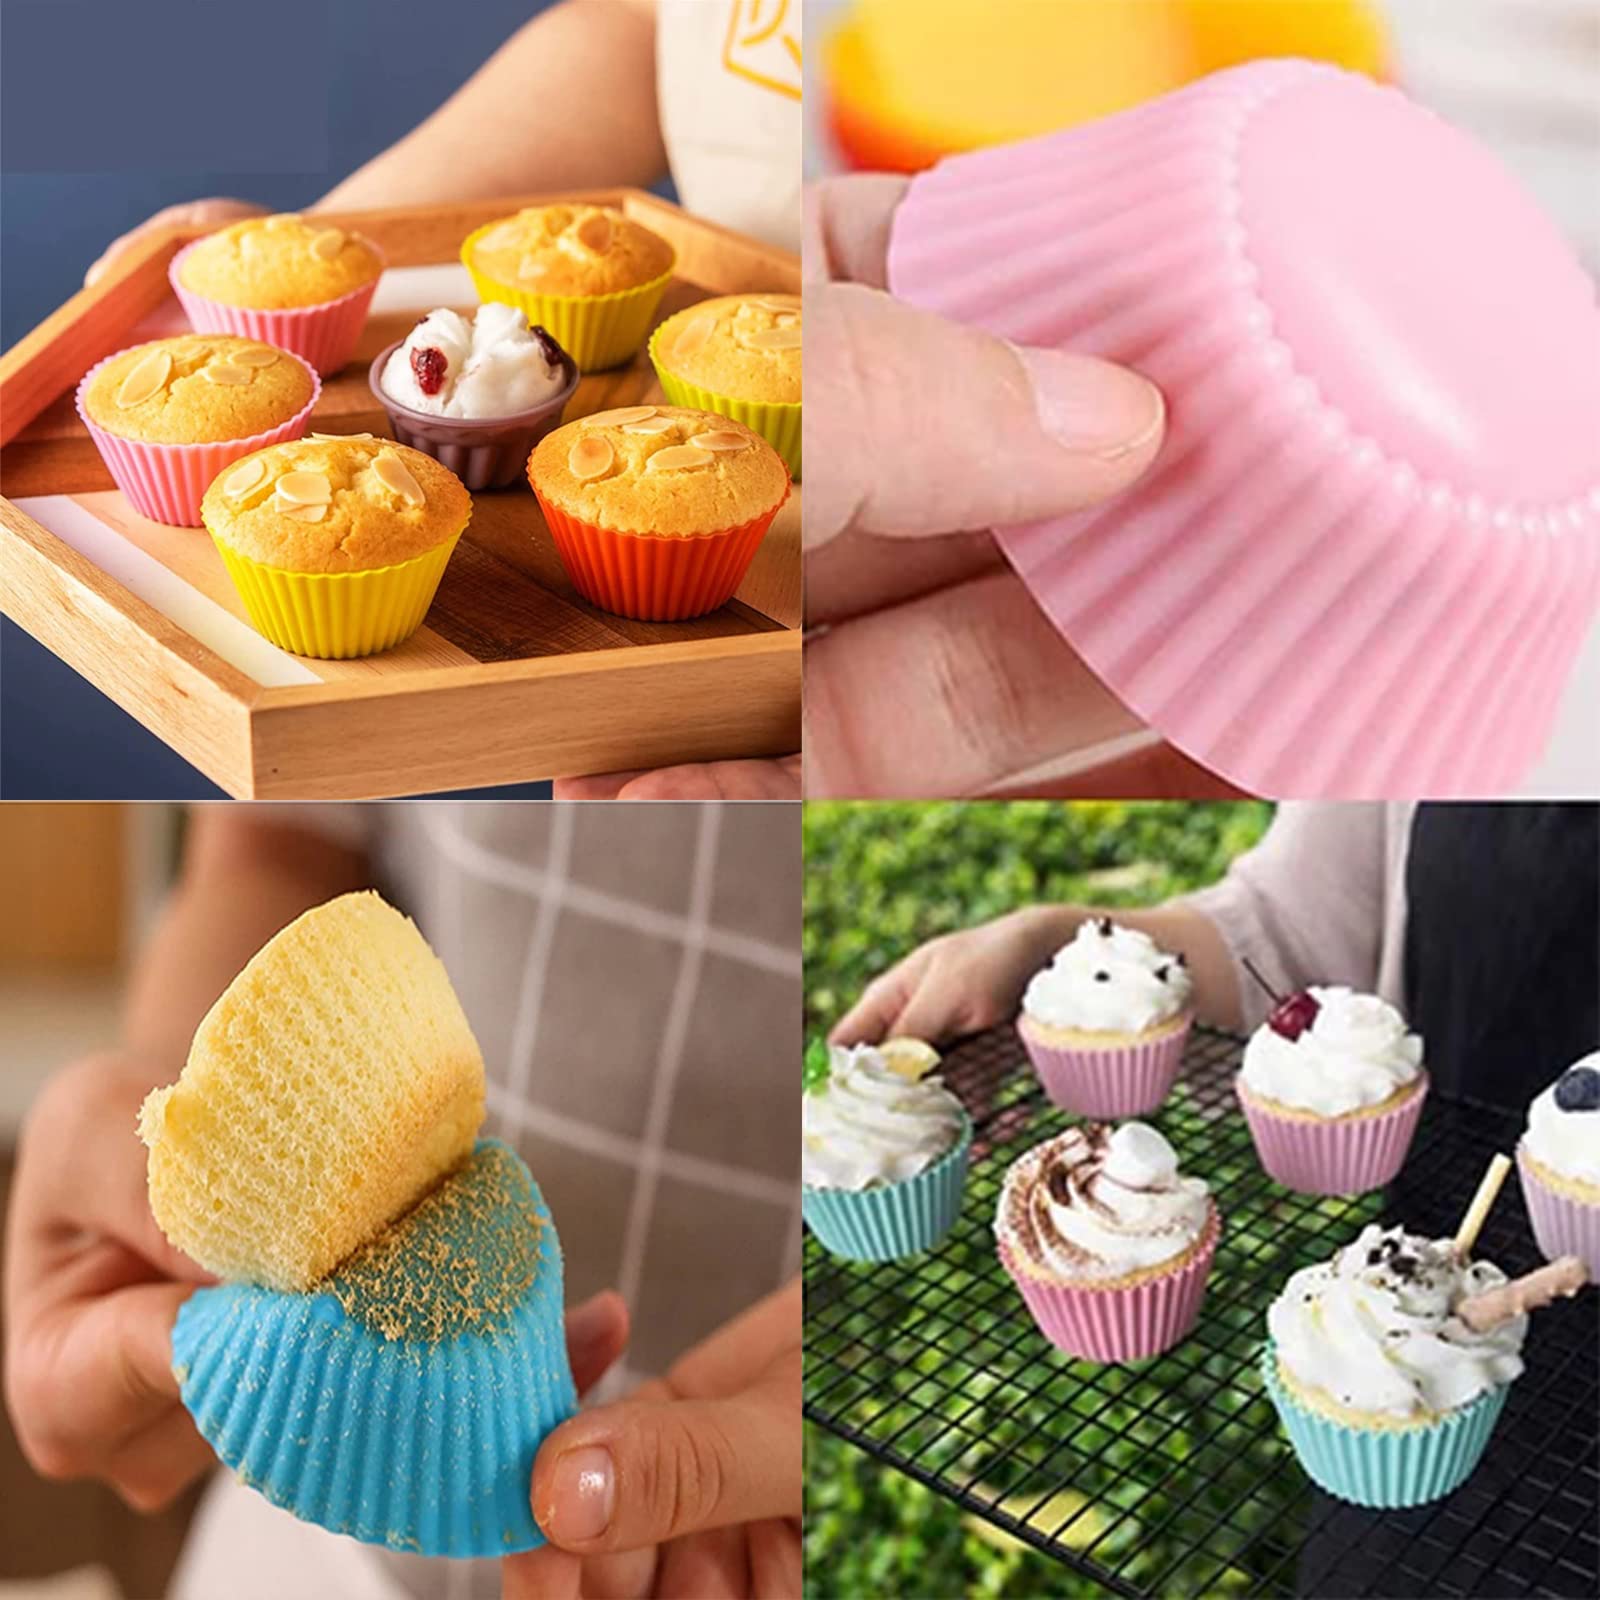 Silicone Cupcake Liners 24PCS,Reusable Non-Stick Muffin Cup Cake Molds Standard,Baking Cup Liners,6 Colors to Choose from